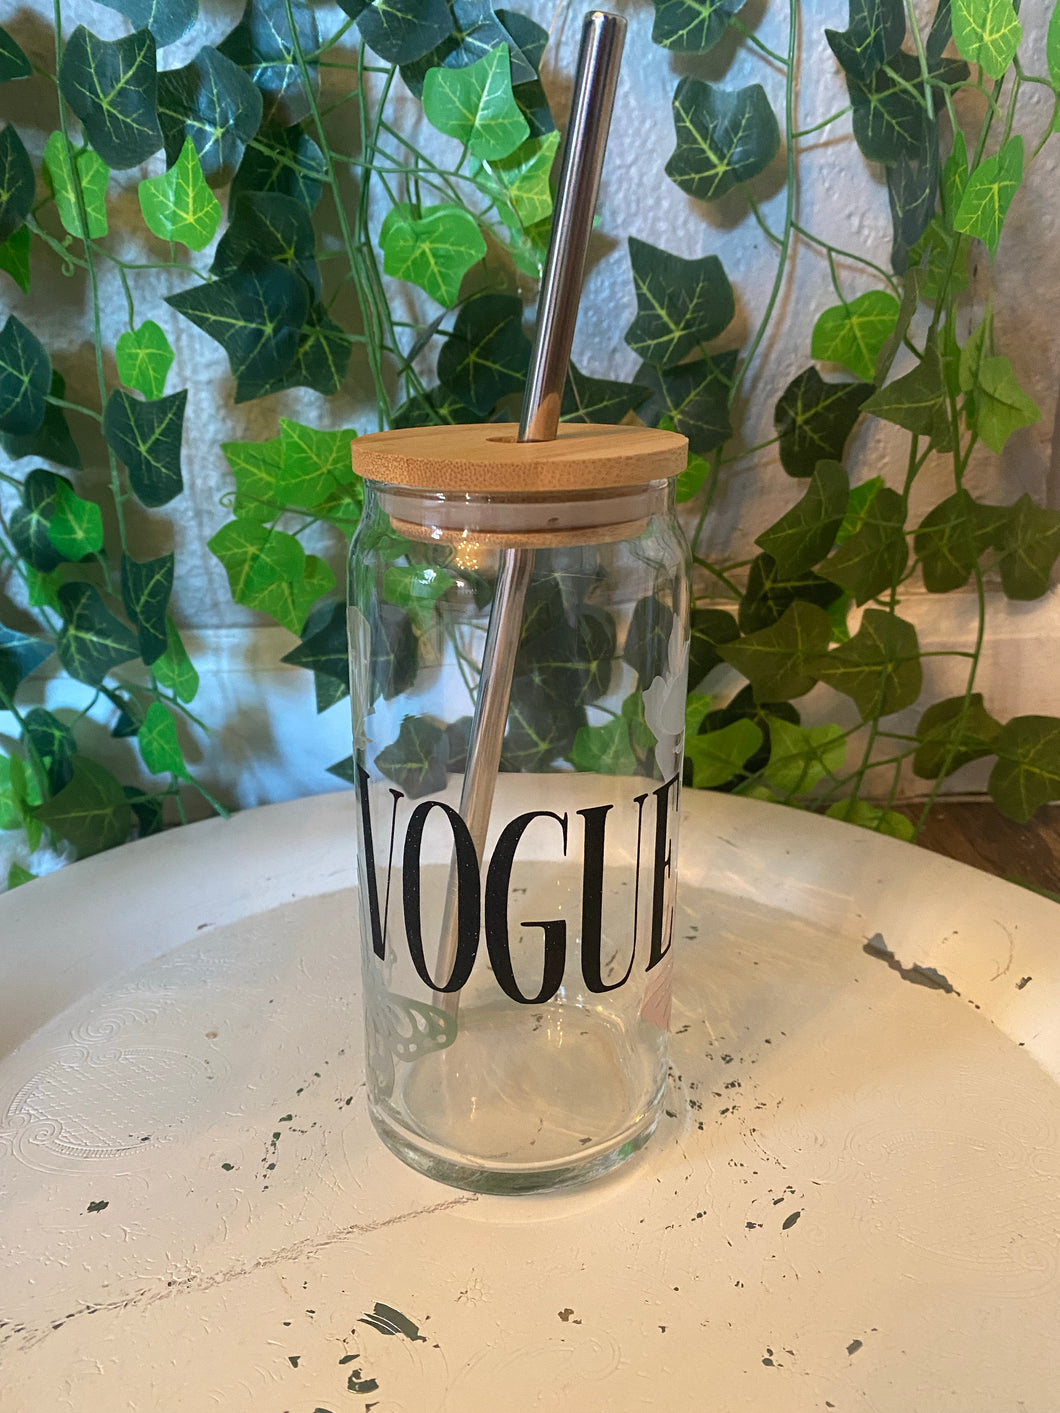 VOGUE COLOR CHANGE GLASS CUP WITH STRAW